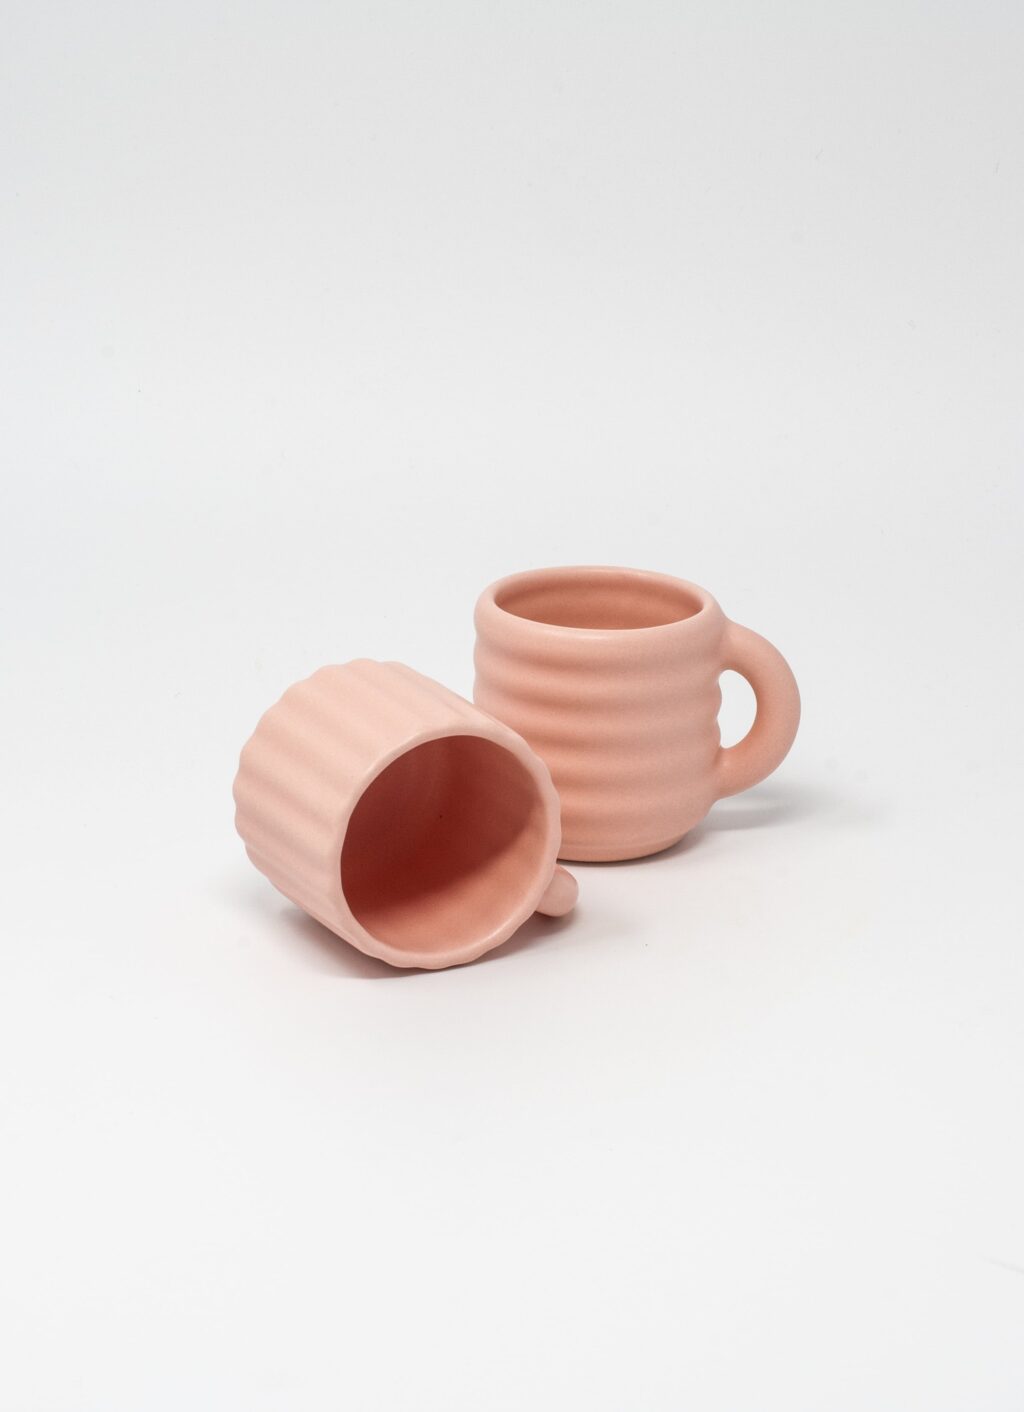 Form and Seek - Ripple Espresso Cups - Set of Two - Rose